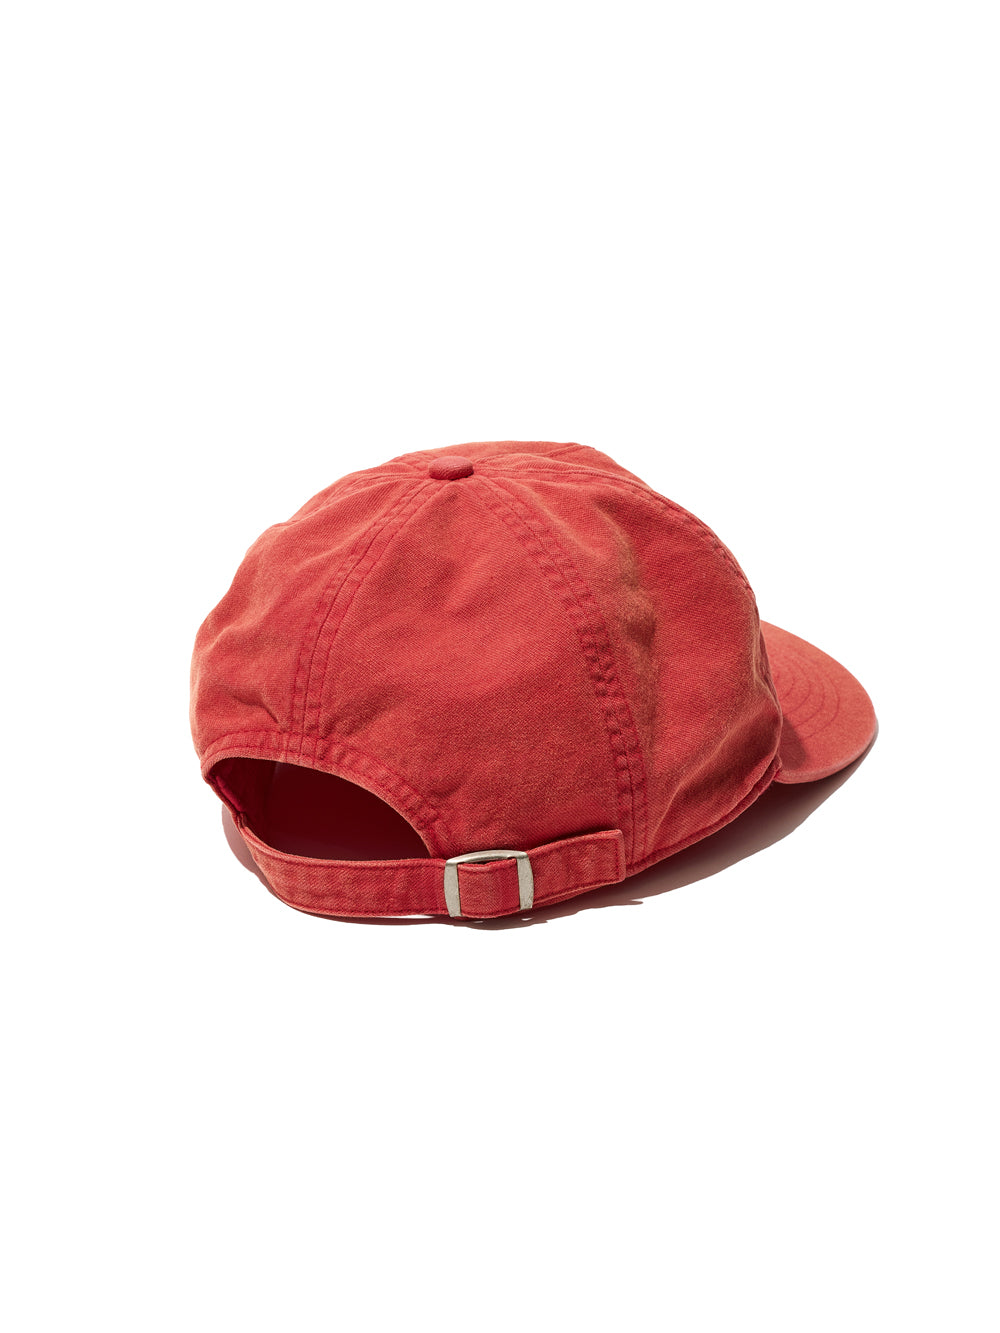 Vintage Washed Sunlight Ball Cap in Red